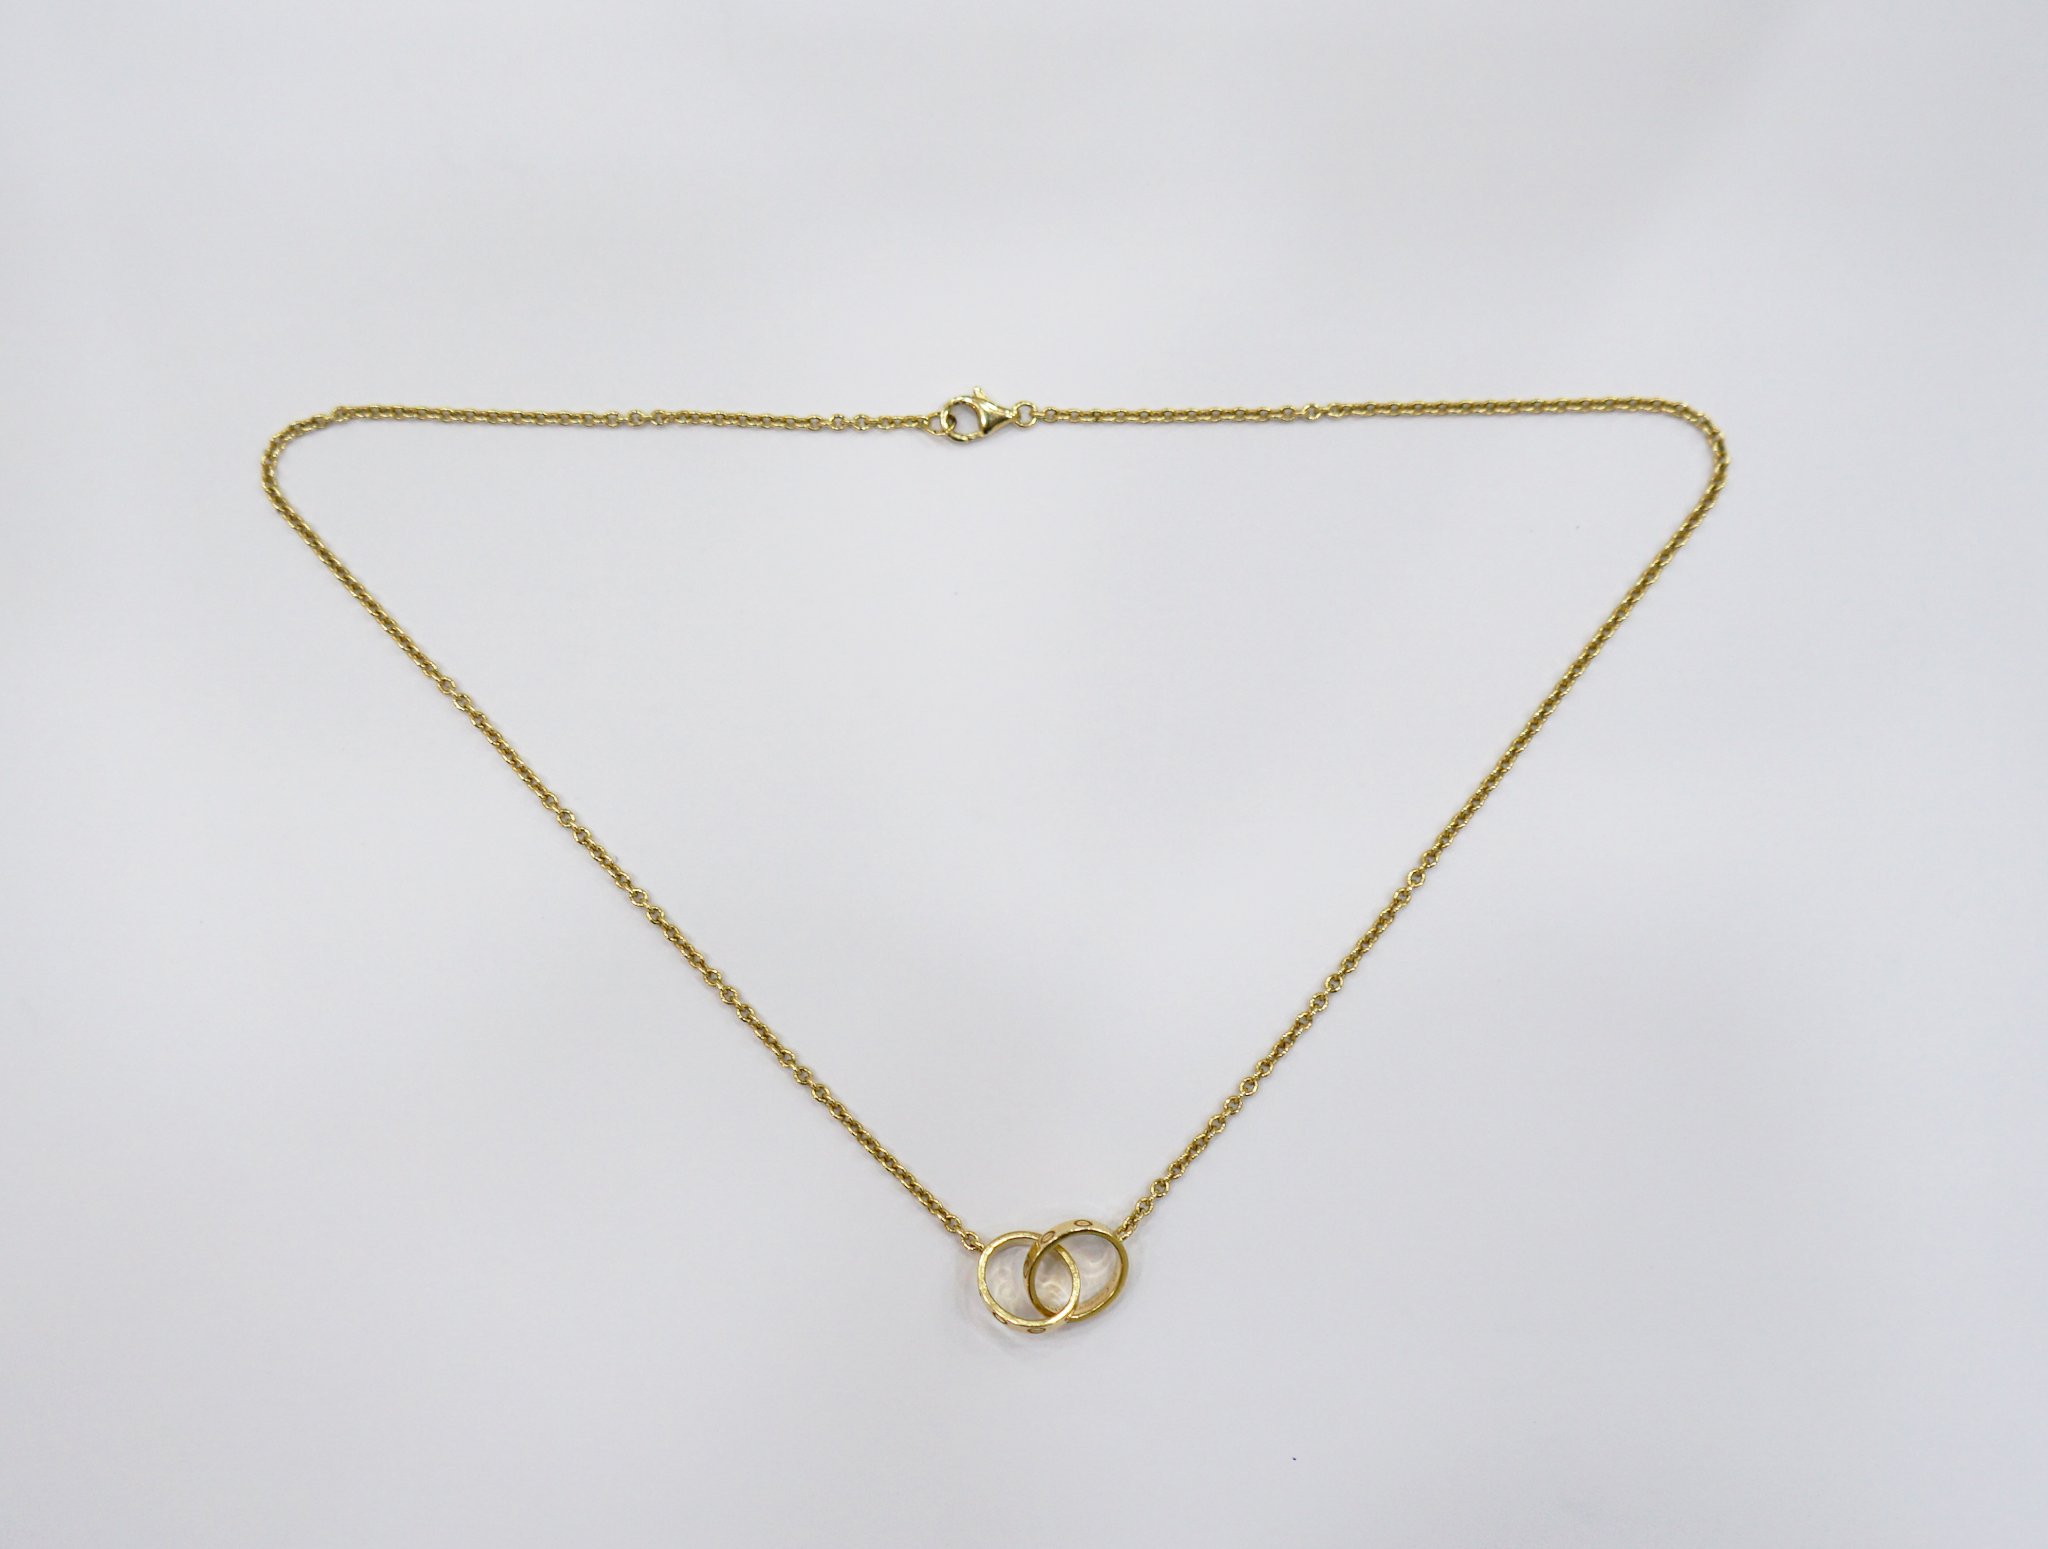 LOVE 2 HOOPS 18K GOLD NECKLACE - styleforless